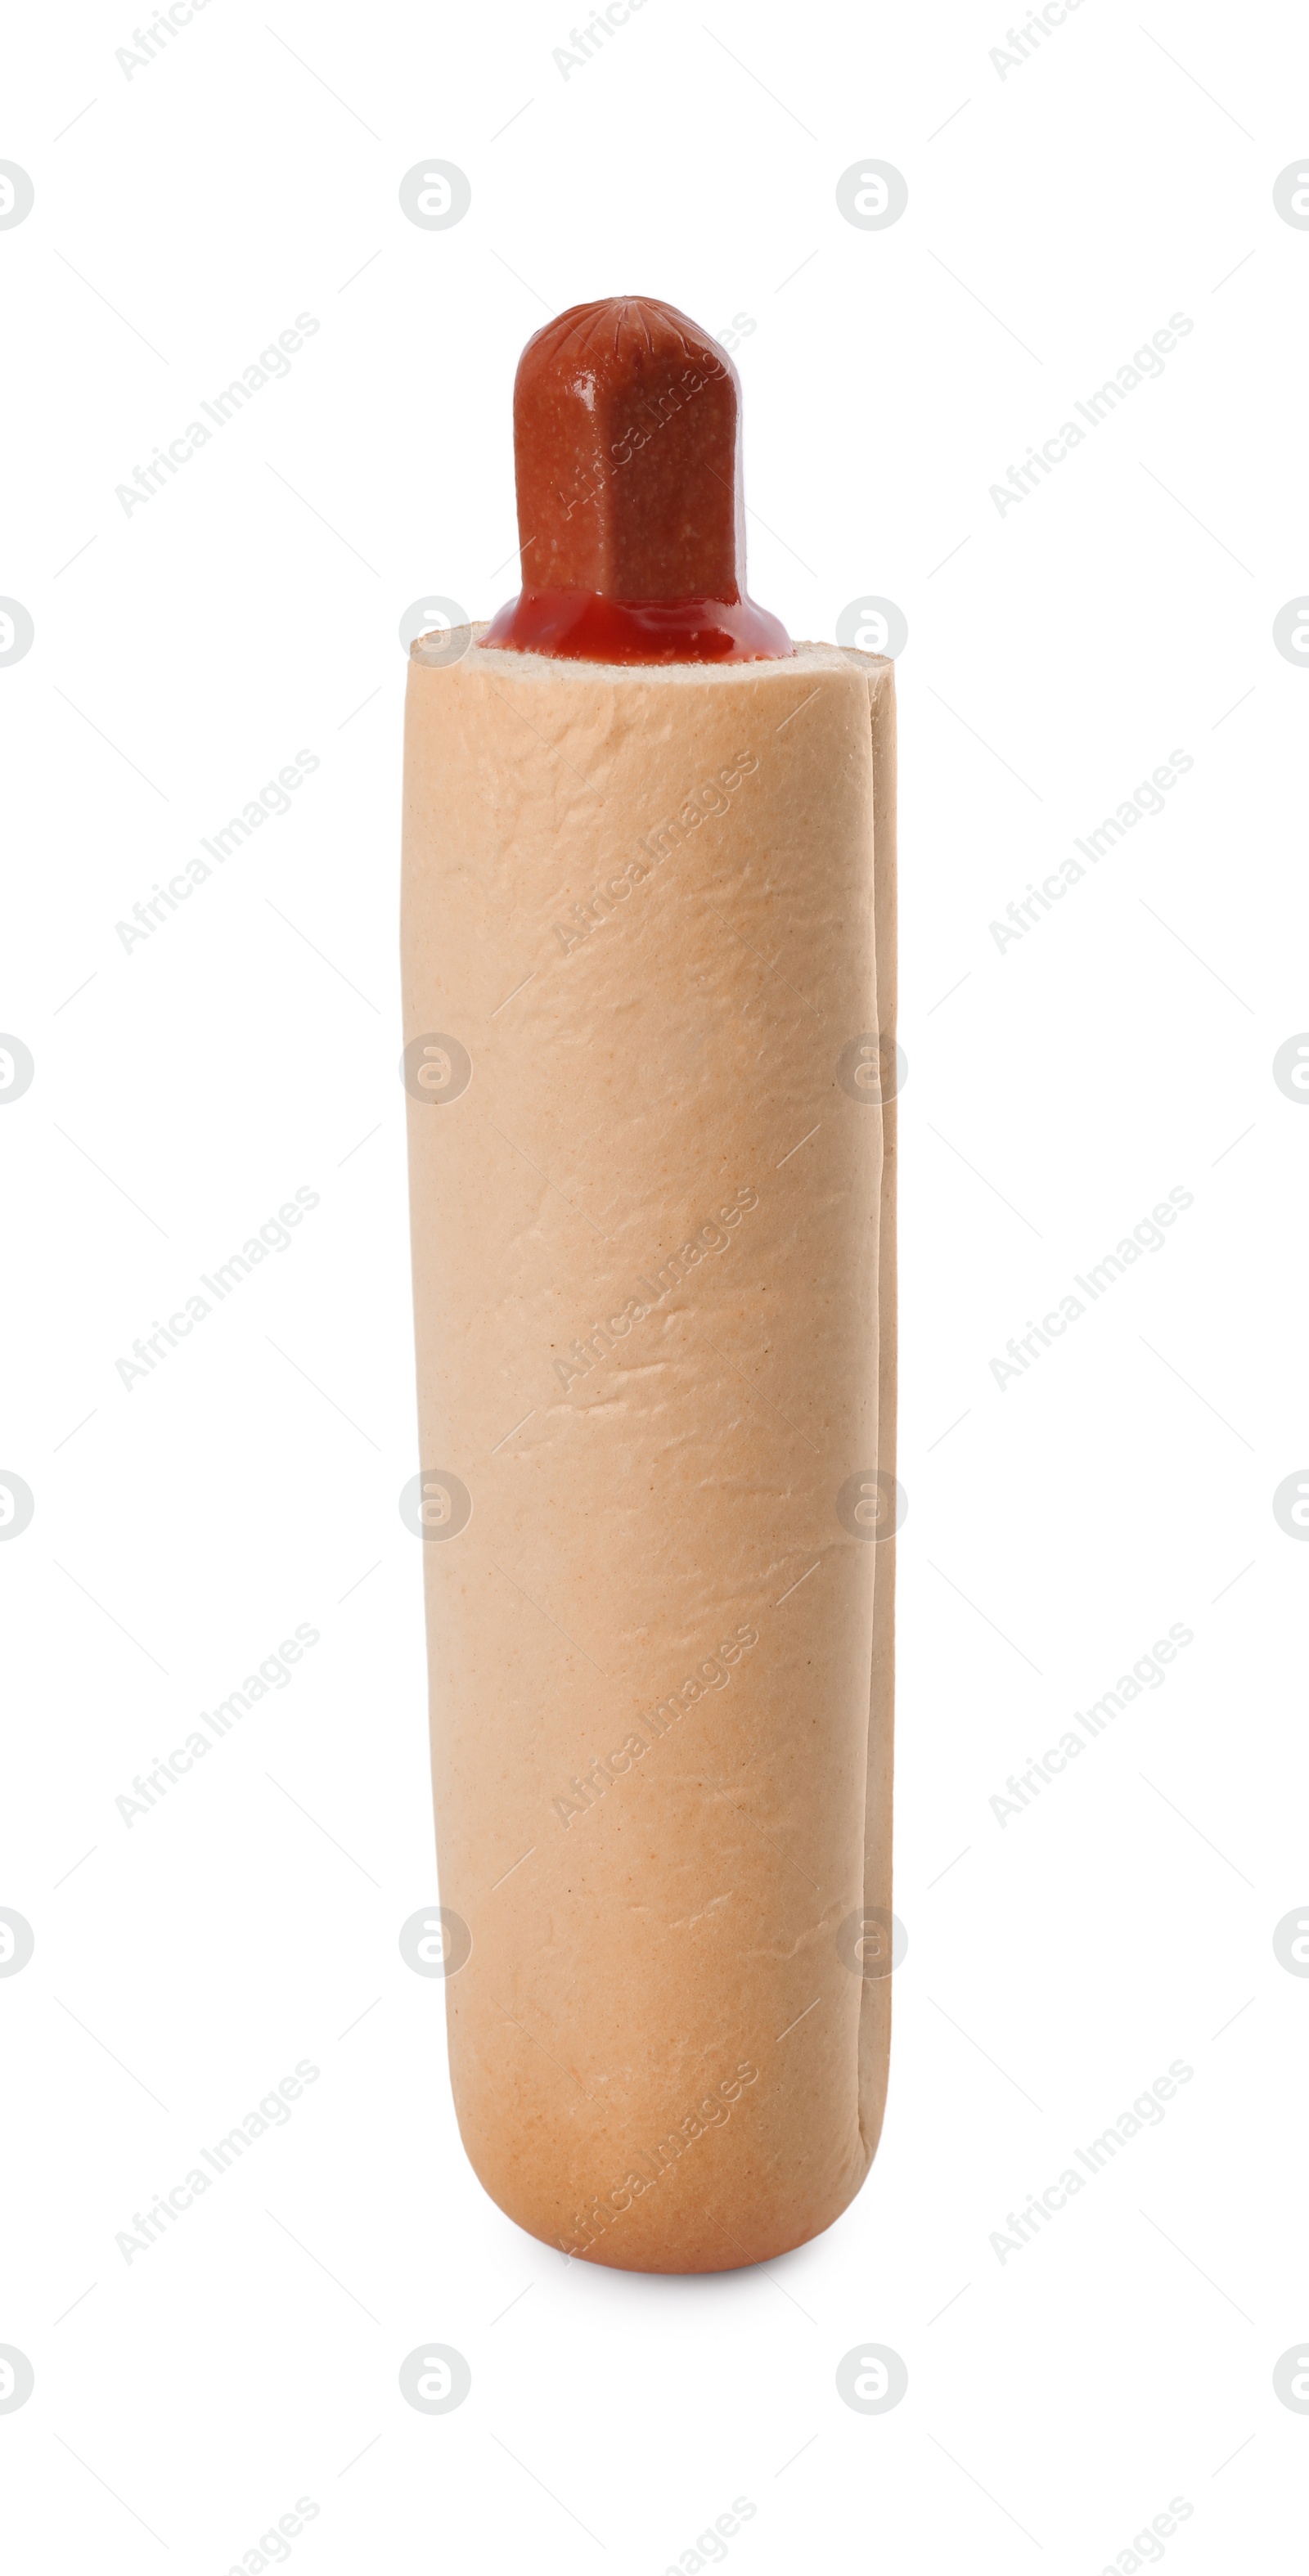 Photo of Tasty french hot dog with ketchup isolated on white